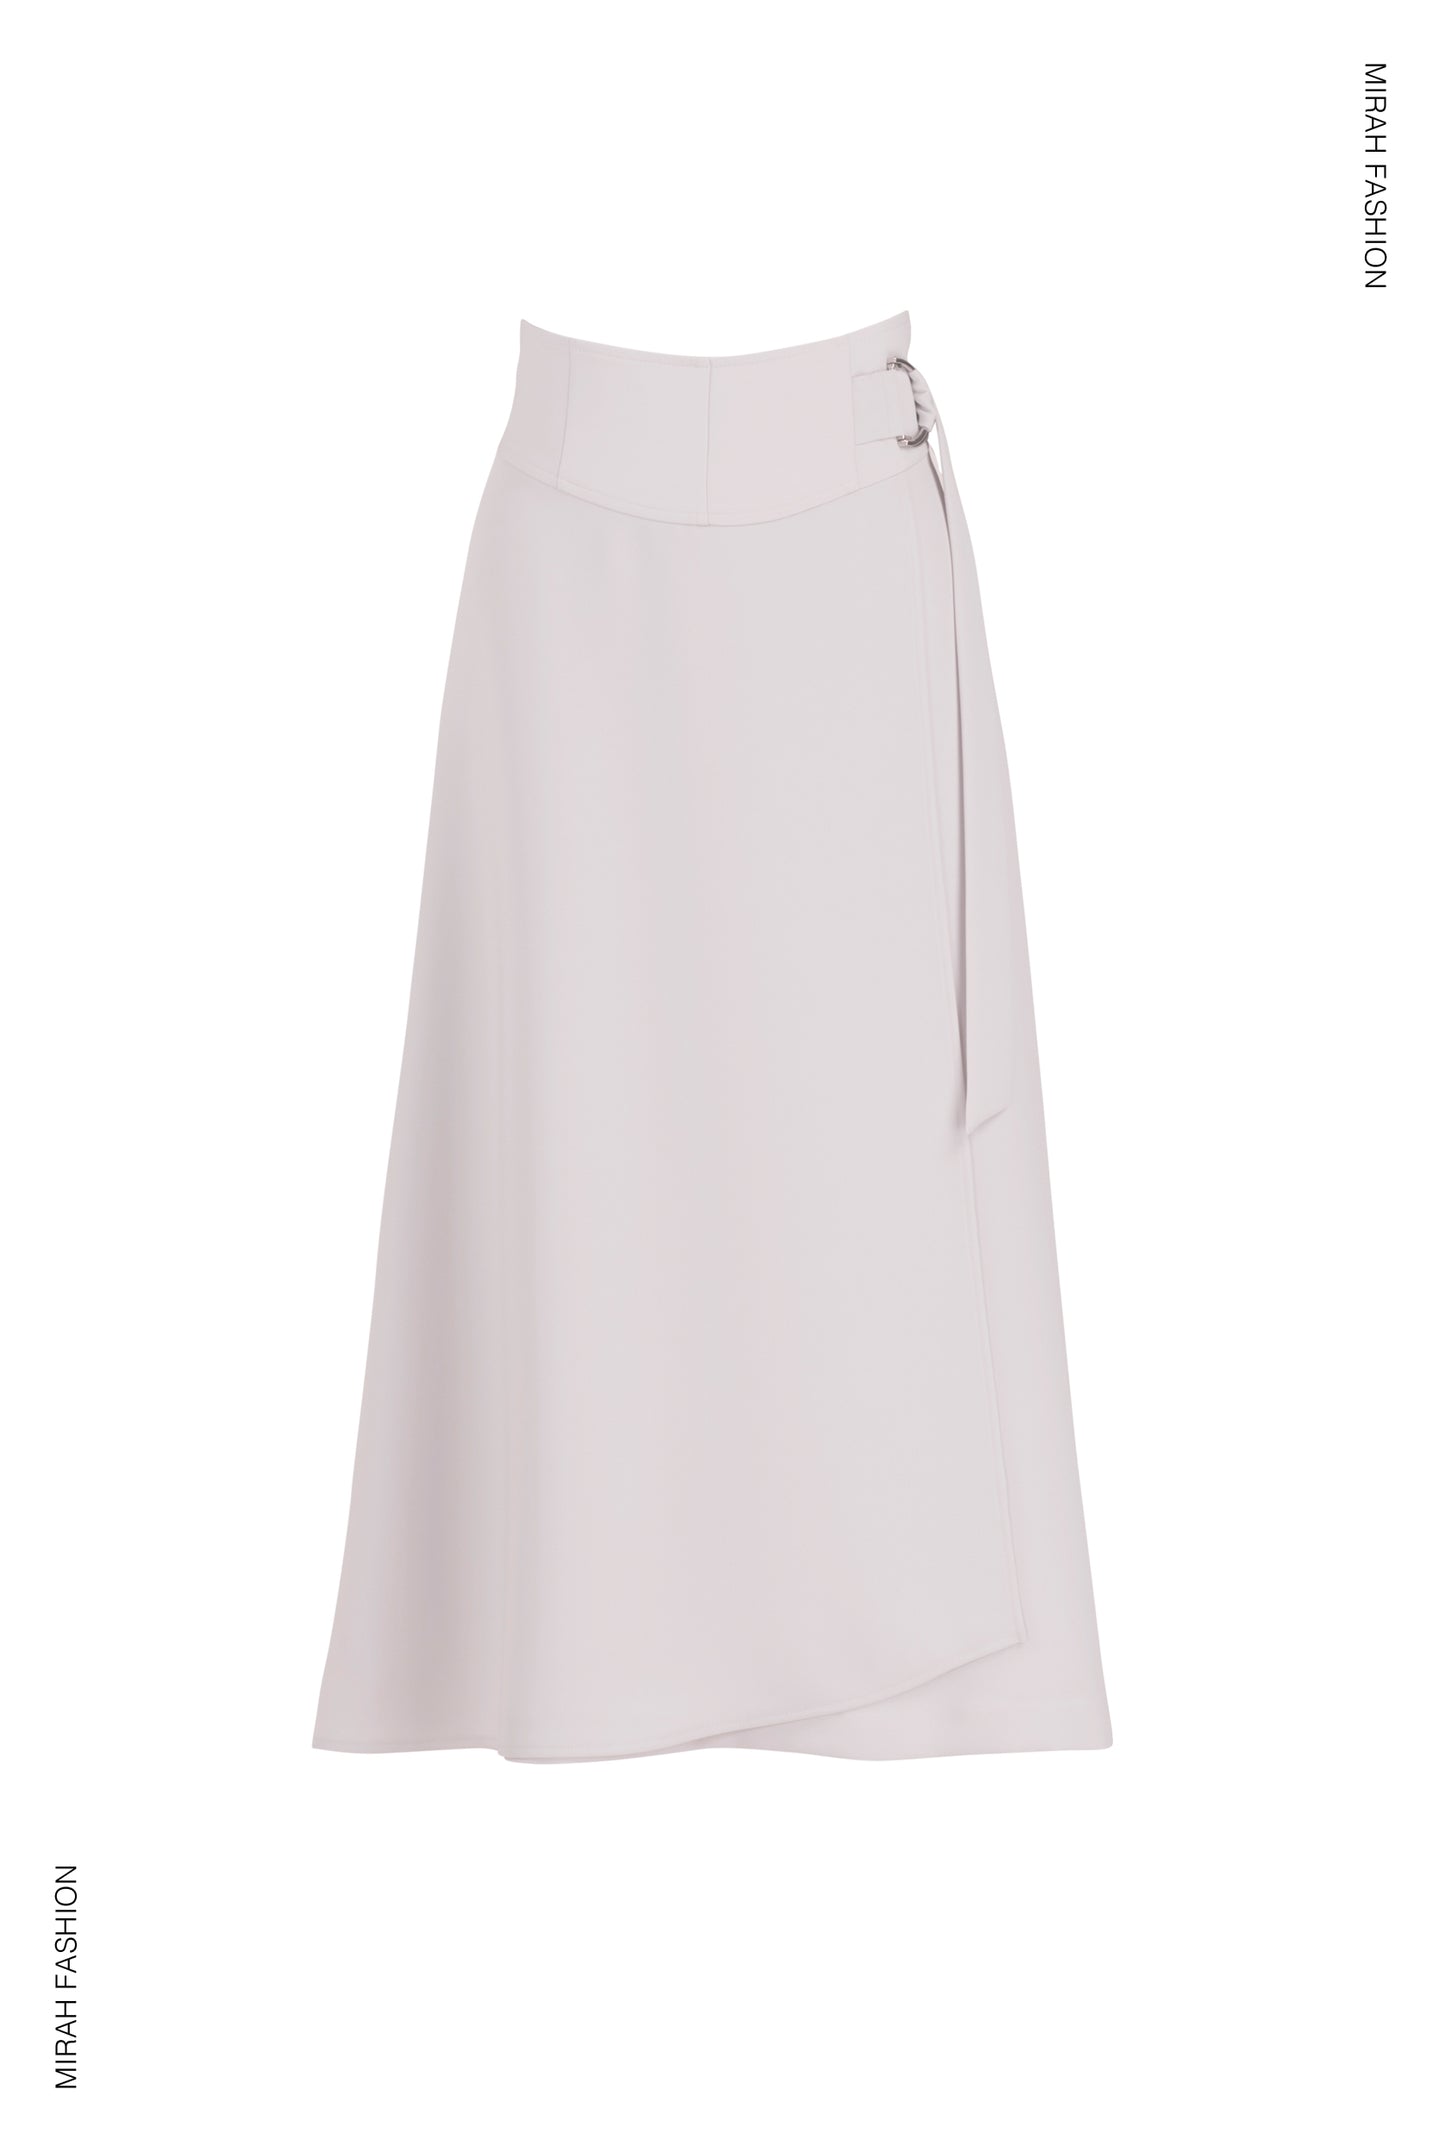 A-Line Skirt with Belt Strap